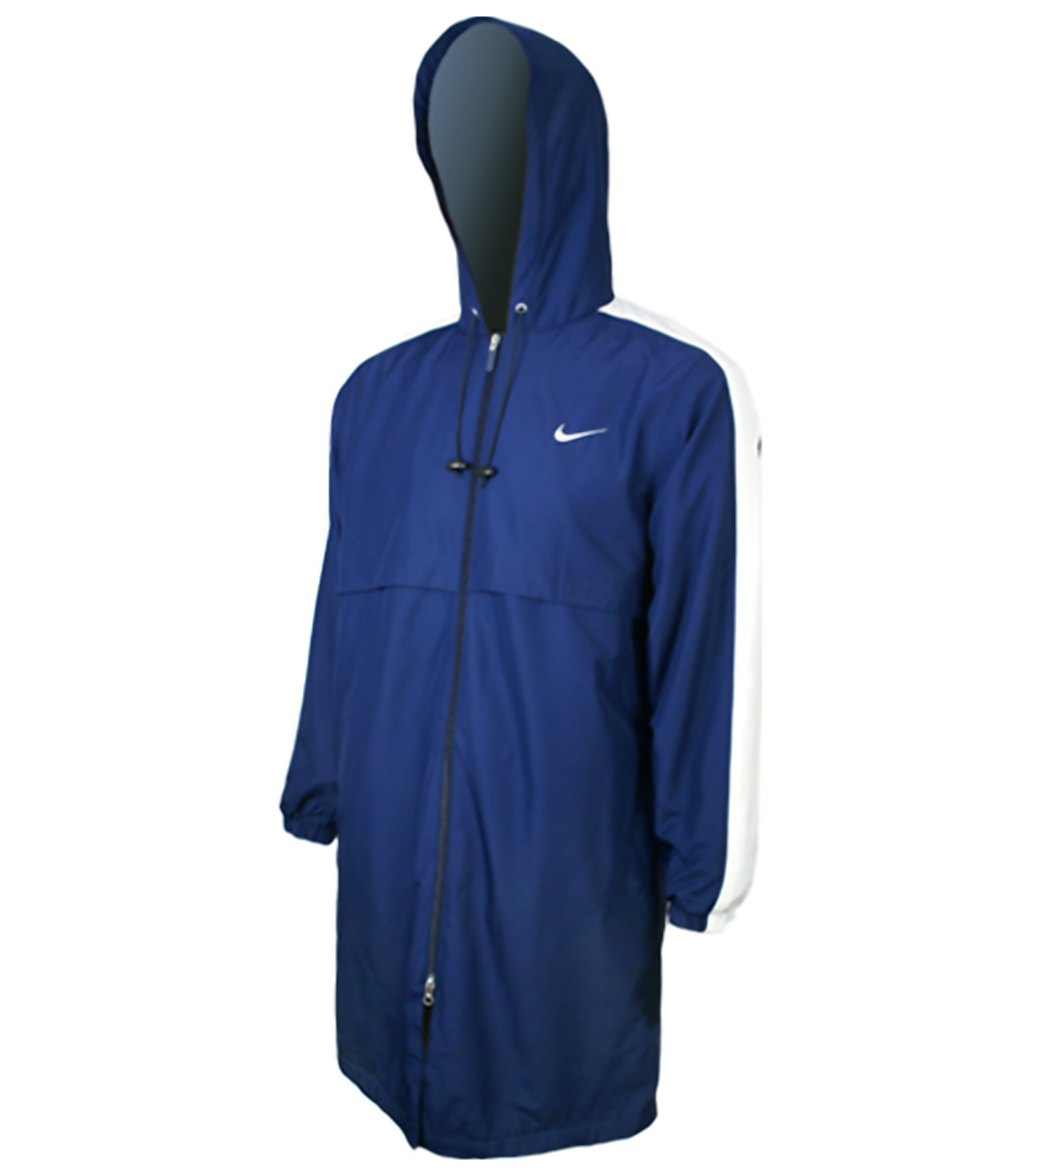 Nike Swim Parka Adult at SwimOutlet.com - Free Shipping